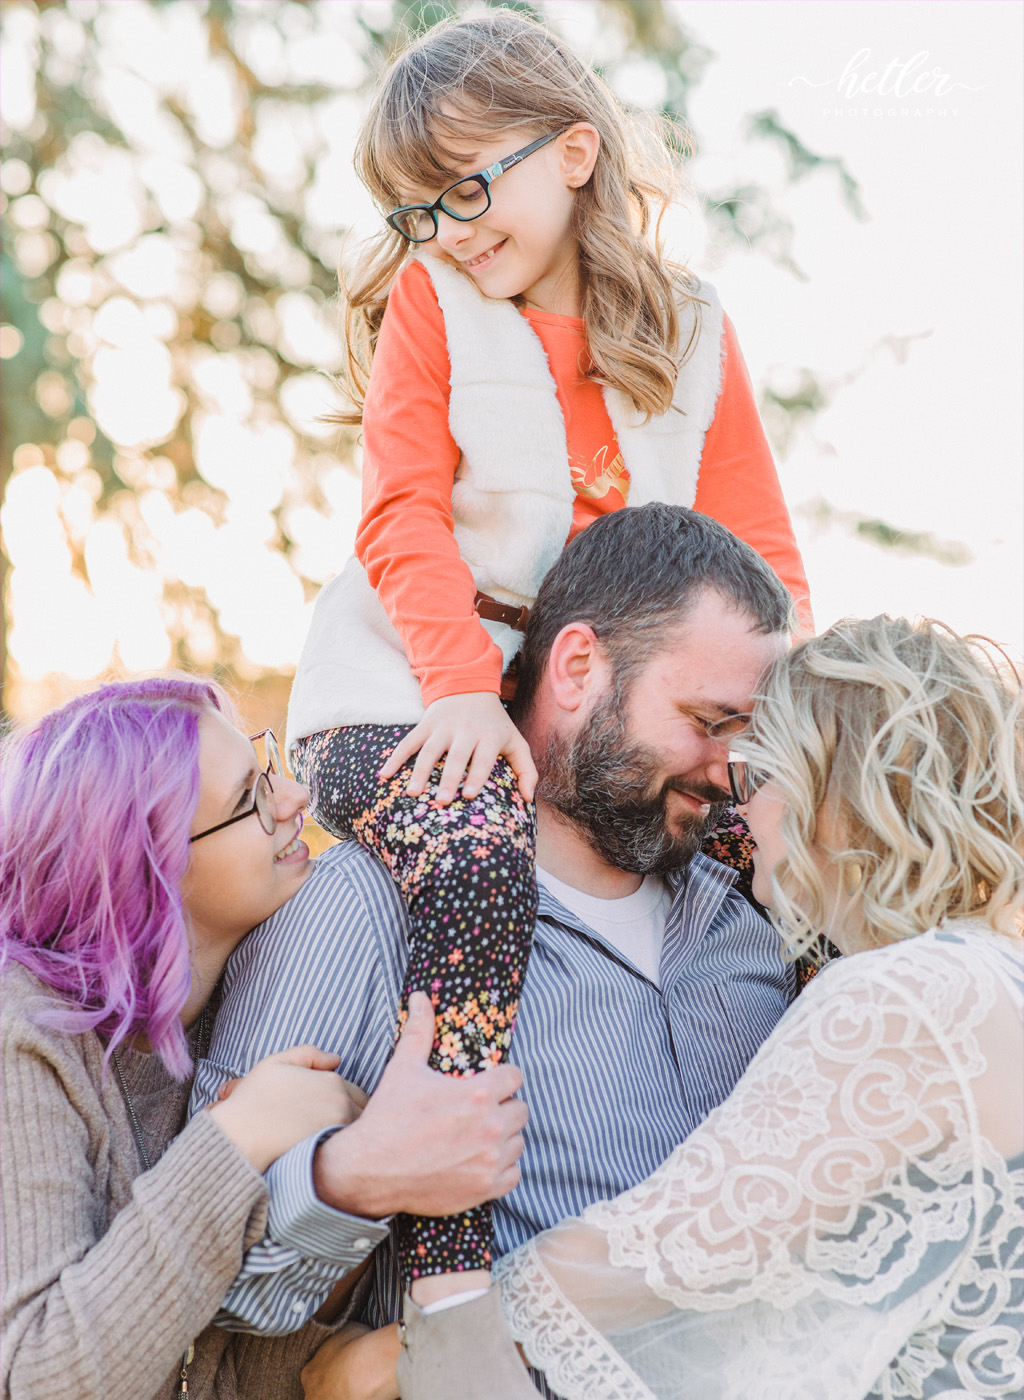 Grand Rapids family photos at The Highlands during golden hour